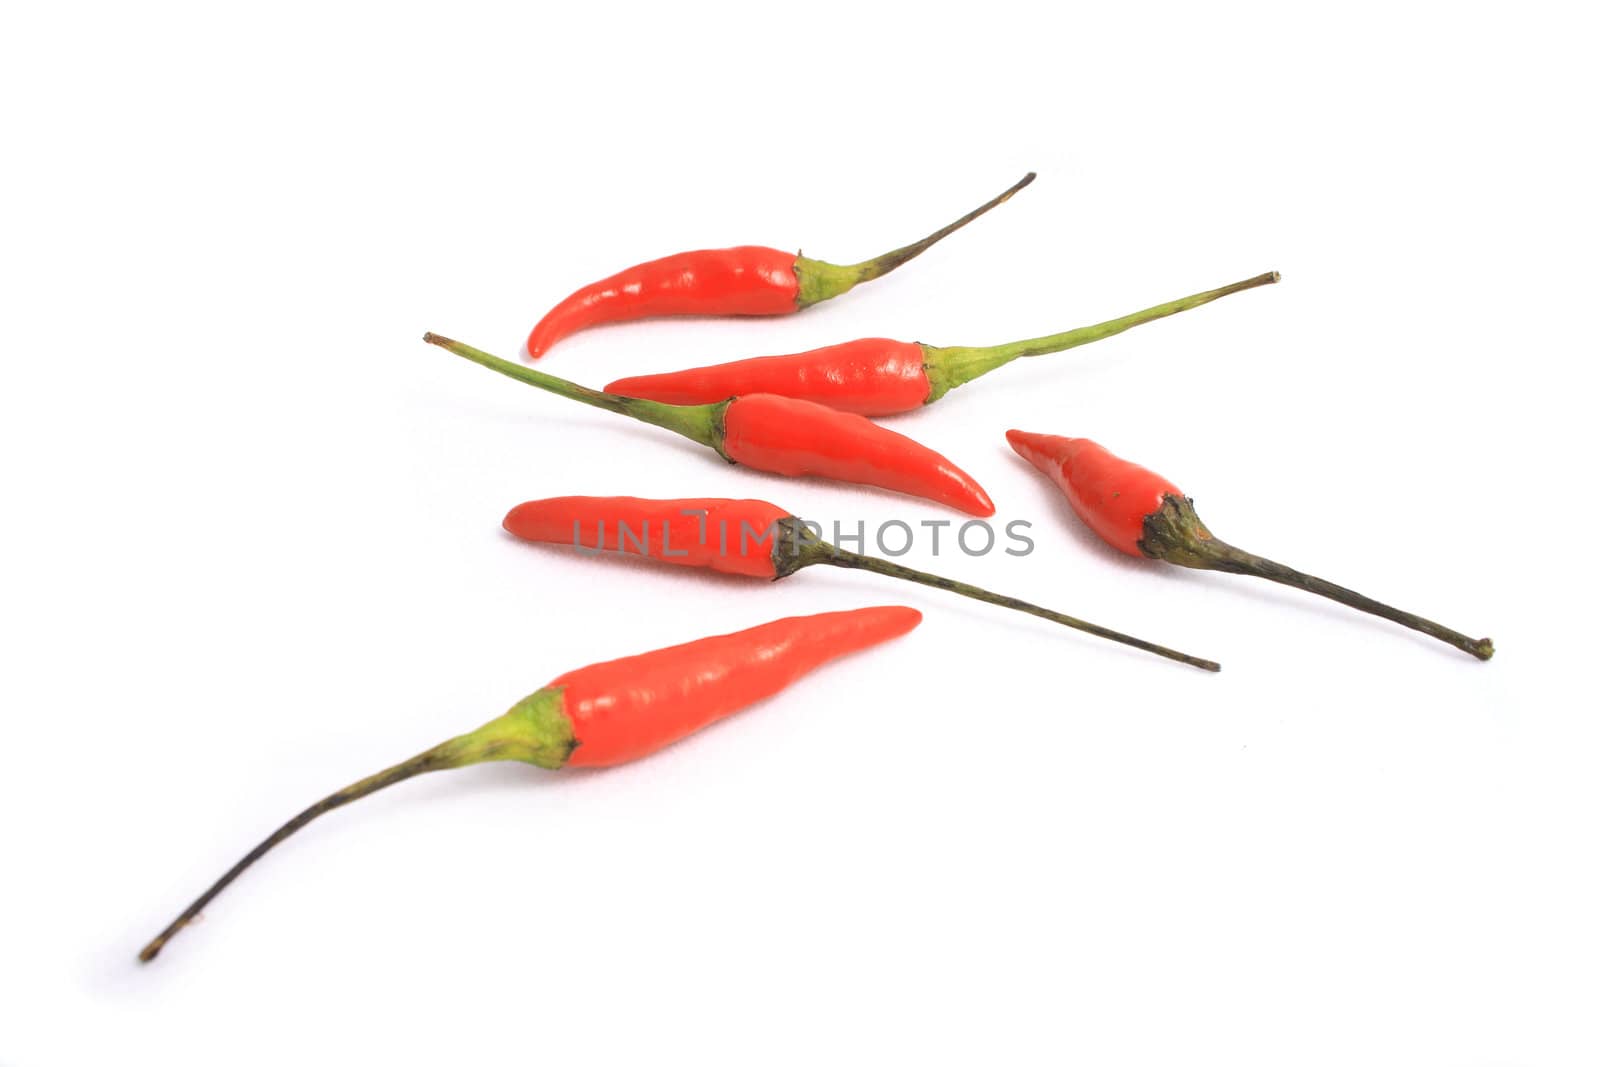 Little red peppers on a white background